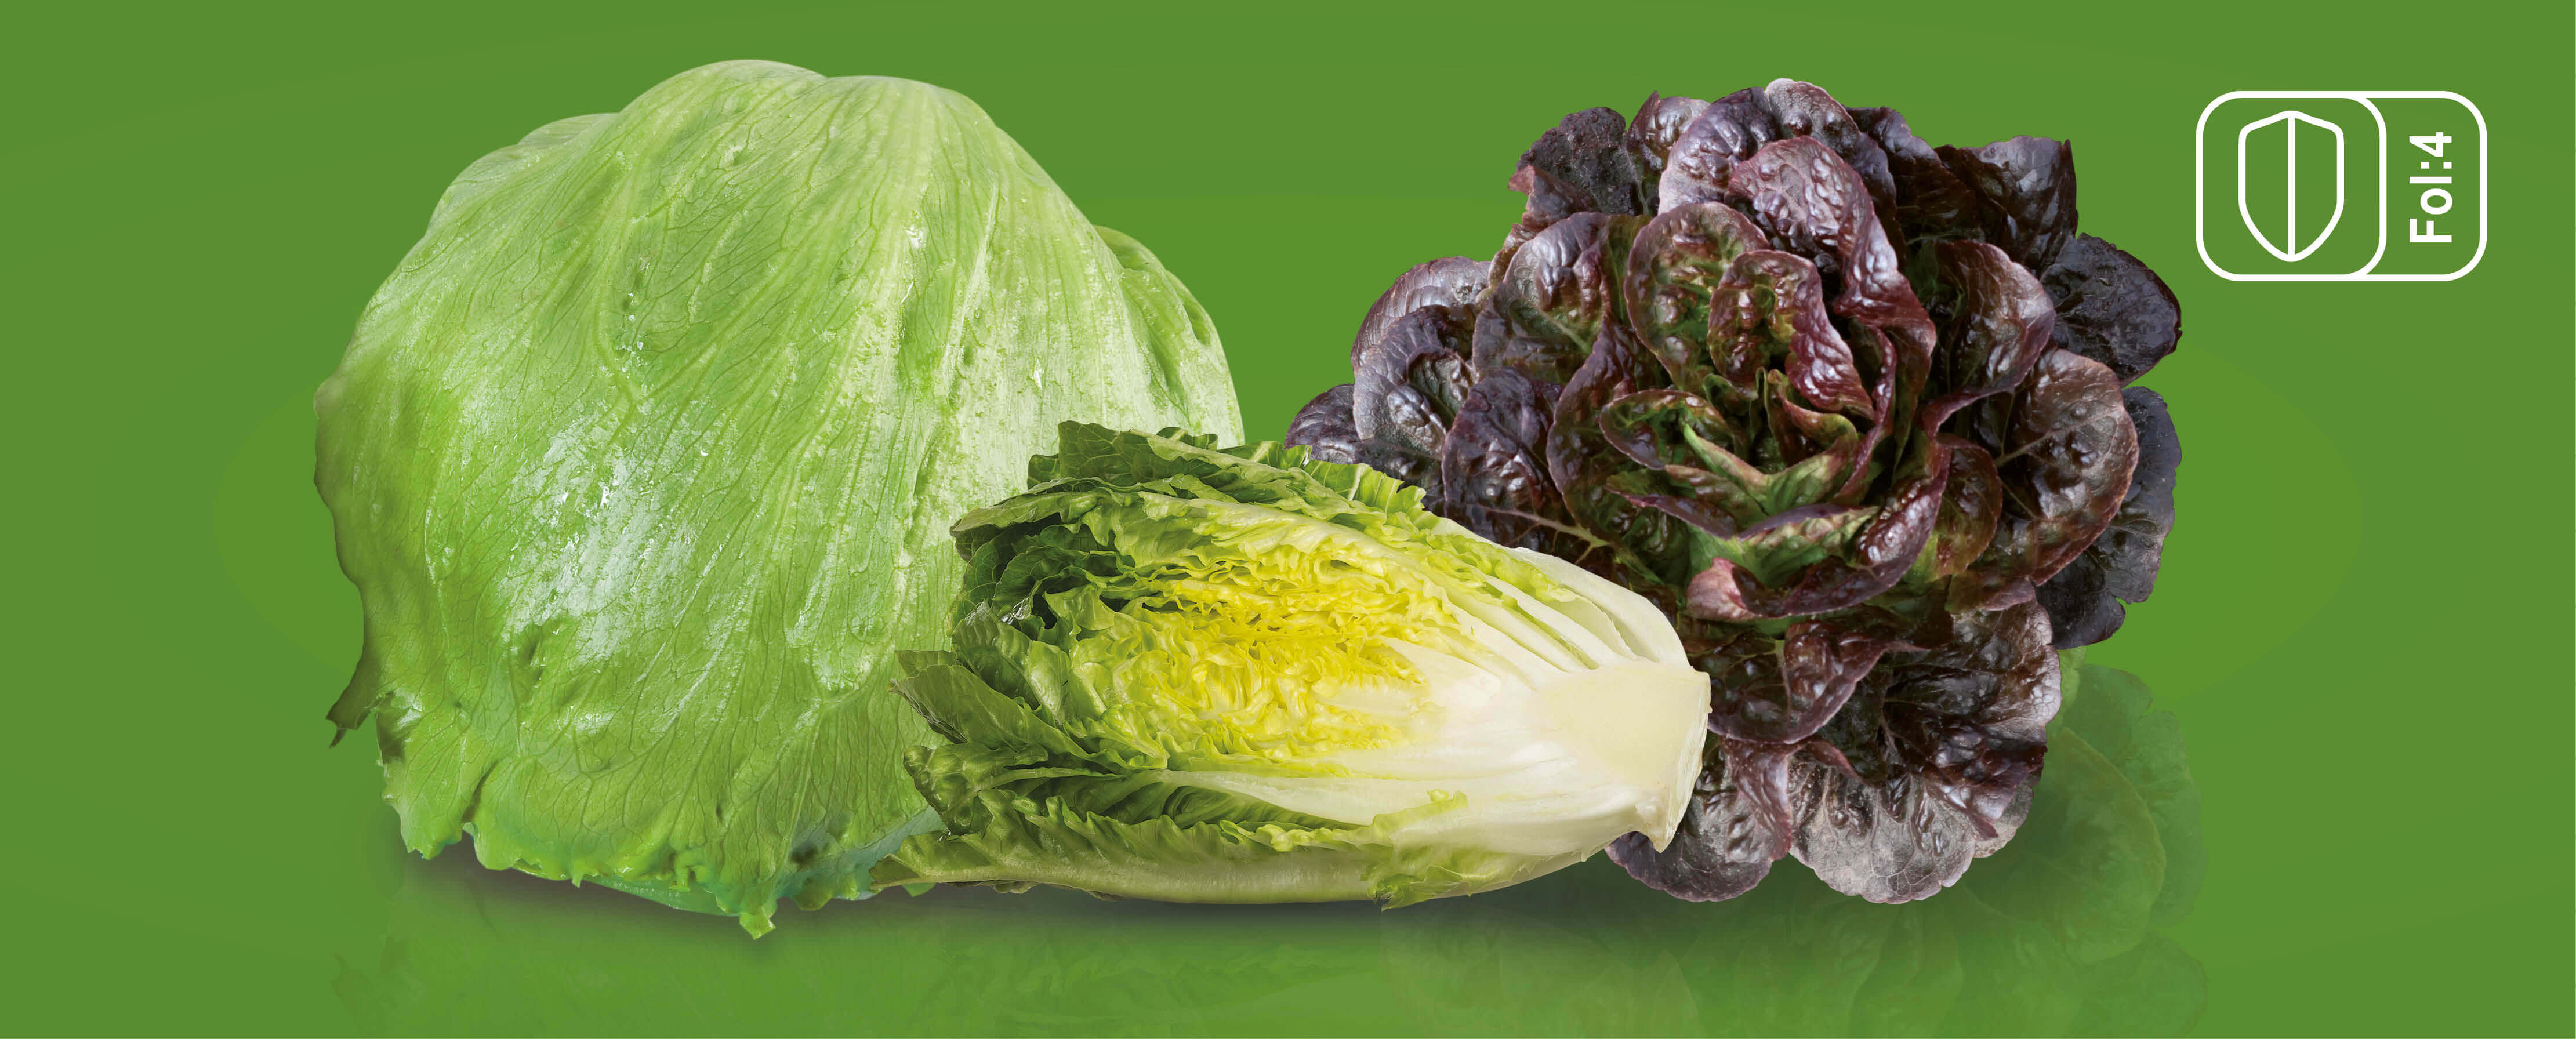 Enza Zaden has identified a significant part of their Lettuce assortment to be High Resistant for Fol:4